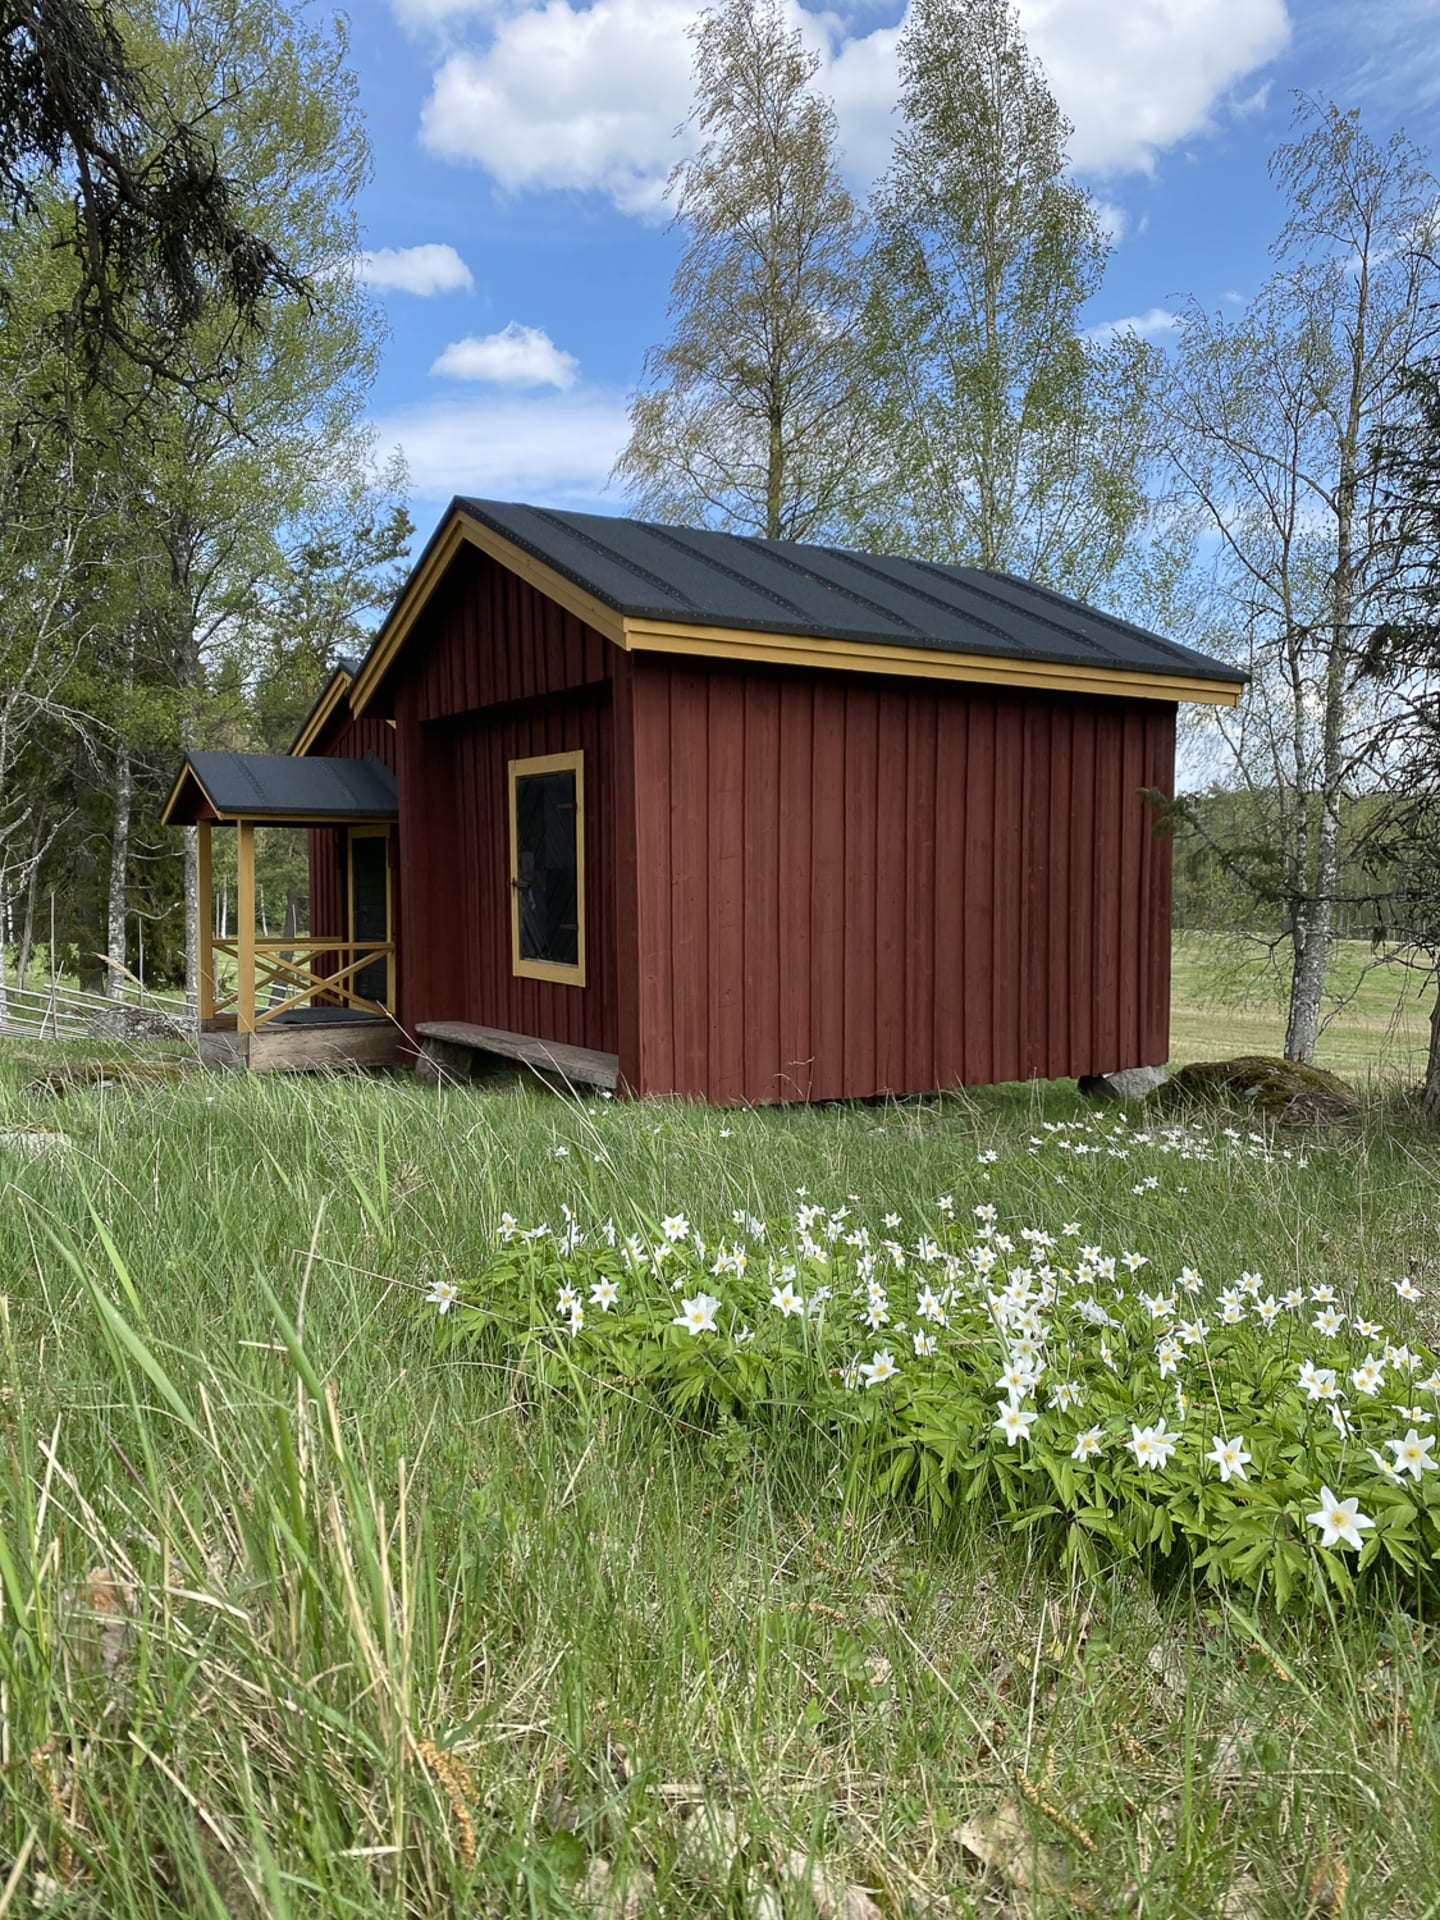 Storehouse cabins are located in the farm's environmentally-managed habitat.